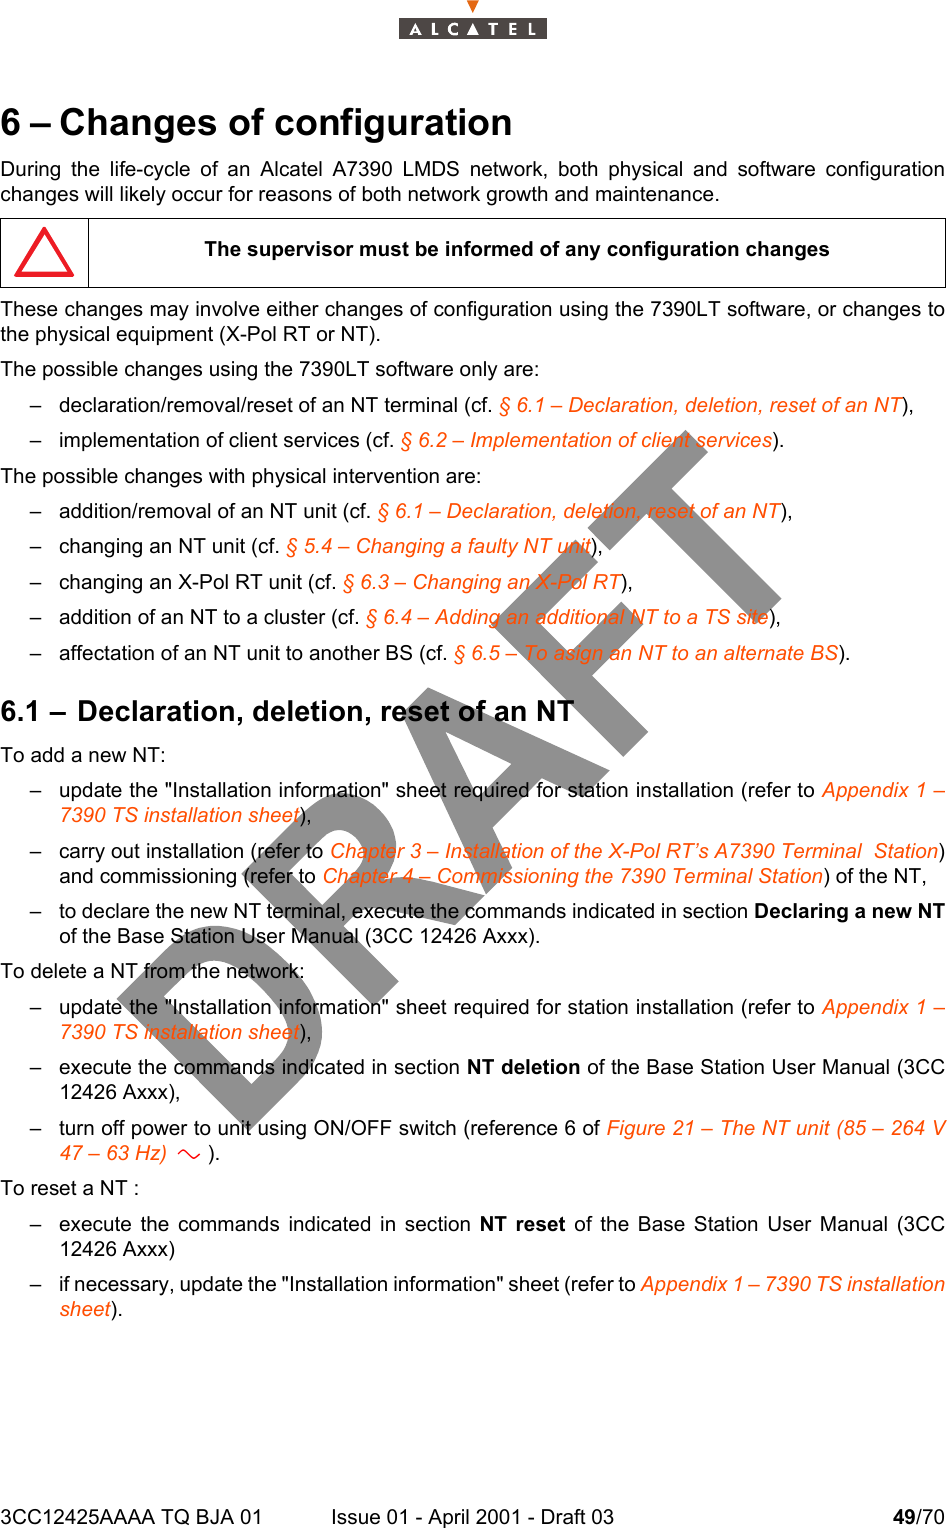 3CC12425AAAA TQ BJA 01 Issue 01 - April 2001 - Draft 03 49/70526 – Changes of configurationDuring the life-cycle of an Alcatel A7390 LMDS network, both physical and software configurationchanges will likely occur for reasons of both network growth and maintenance.These changes may involve either changes of configuration using the 7390LT software, or changes tothe physical equipment (X-Pol RT or NT).The possible changes using the 7390LT software only are:– declaration/removal/reset of an NT terminal (cf. § 6.1 – Declaration, deletion, reset of an NT),– implementation of client services (cf. § 6.2 – Implementation of client services).The possible changes with physical intervention are:– addition/removal of an NT unit (cf. § 6.1 – Declaration, deletion, reset of an NT),– changing an NT unit (cf. § 5.4 – Changing a faulty NT unit),– changing an X-Pol RT unit (cf. § 6.3 – Changing an X-Pol RT),– addition of an NT to a cluster (cf. § 6.4 – Adding an additional NT to a TS site),– affectation of an NT unit to another BS (cf. § 6.5 – To asign an NT to an alternate BS).6.1 – Declaration, deletion, reset of an NTTo add a new NT:– update the &quot;Installation information&quot; sheet required for station installation (refer to Appendix 1 –7390 TS installation sheet),– carry out installation (refer to Chapter 3 – Installation of the X-Pol RT’s A7390 Terminal  Station)and commissioning (refer to Chapter 4 – Commissioning the 7390 Terminal Station) of the NT,– to declare the new NT terminal, execute the commands indicated in section Declaring a new NTof the Base Station User Manual (3CC 12426 Axxx).To delete a NT from the network:– update the &quot;Installation information&quot; sheet required for station installation (refer to Appendix 1 –7390 TS installation sheet),– execute the commands indicated in section NT deletion of the Base Station User Manual (3CC12426 Axxx),– turn off power to unit using ON/OFF switch (reference 6 of Figure 21 – The NT unit (85 – 264 V47 – 63 Hz)       ).To reset a NT :– execute the commands indicated in section NT reset of the Base Station User Manual (3CC12426 Axxx)– if necessary, update the &quot;Installation information&quot; sheet (refer to Appendix 1 – 7390 TS installationsheet).The supervisor must be informed of any configuration changesa